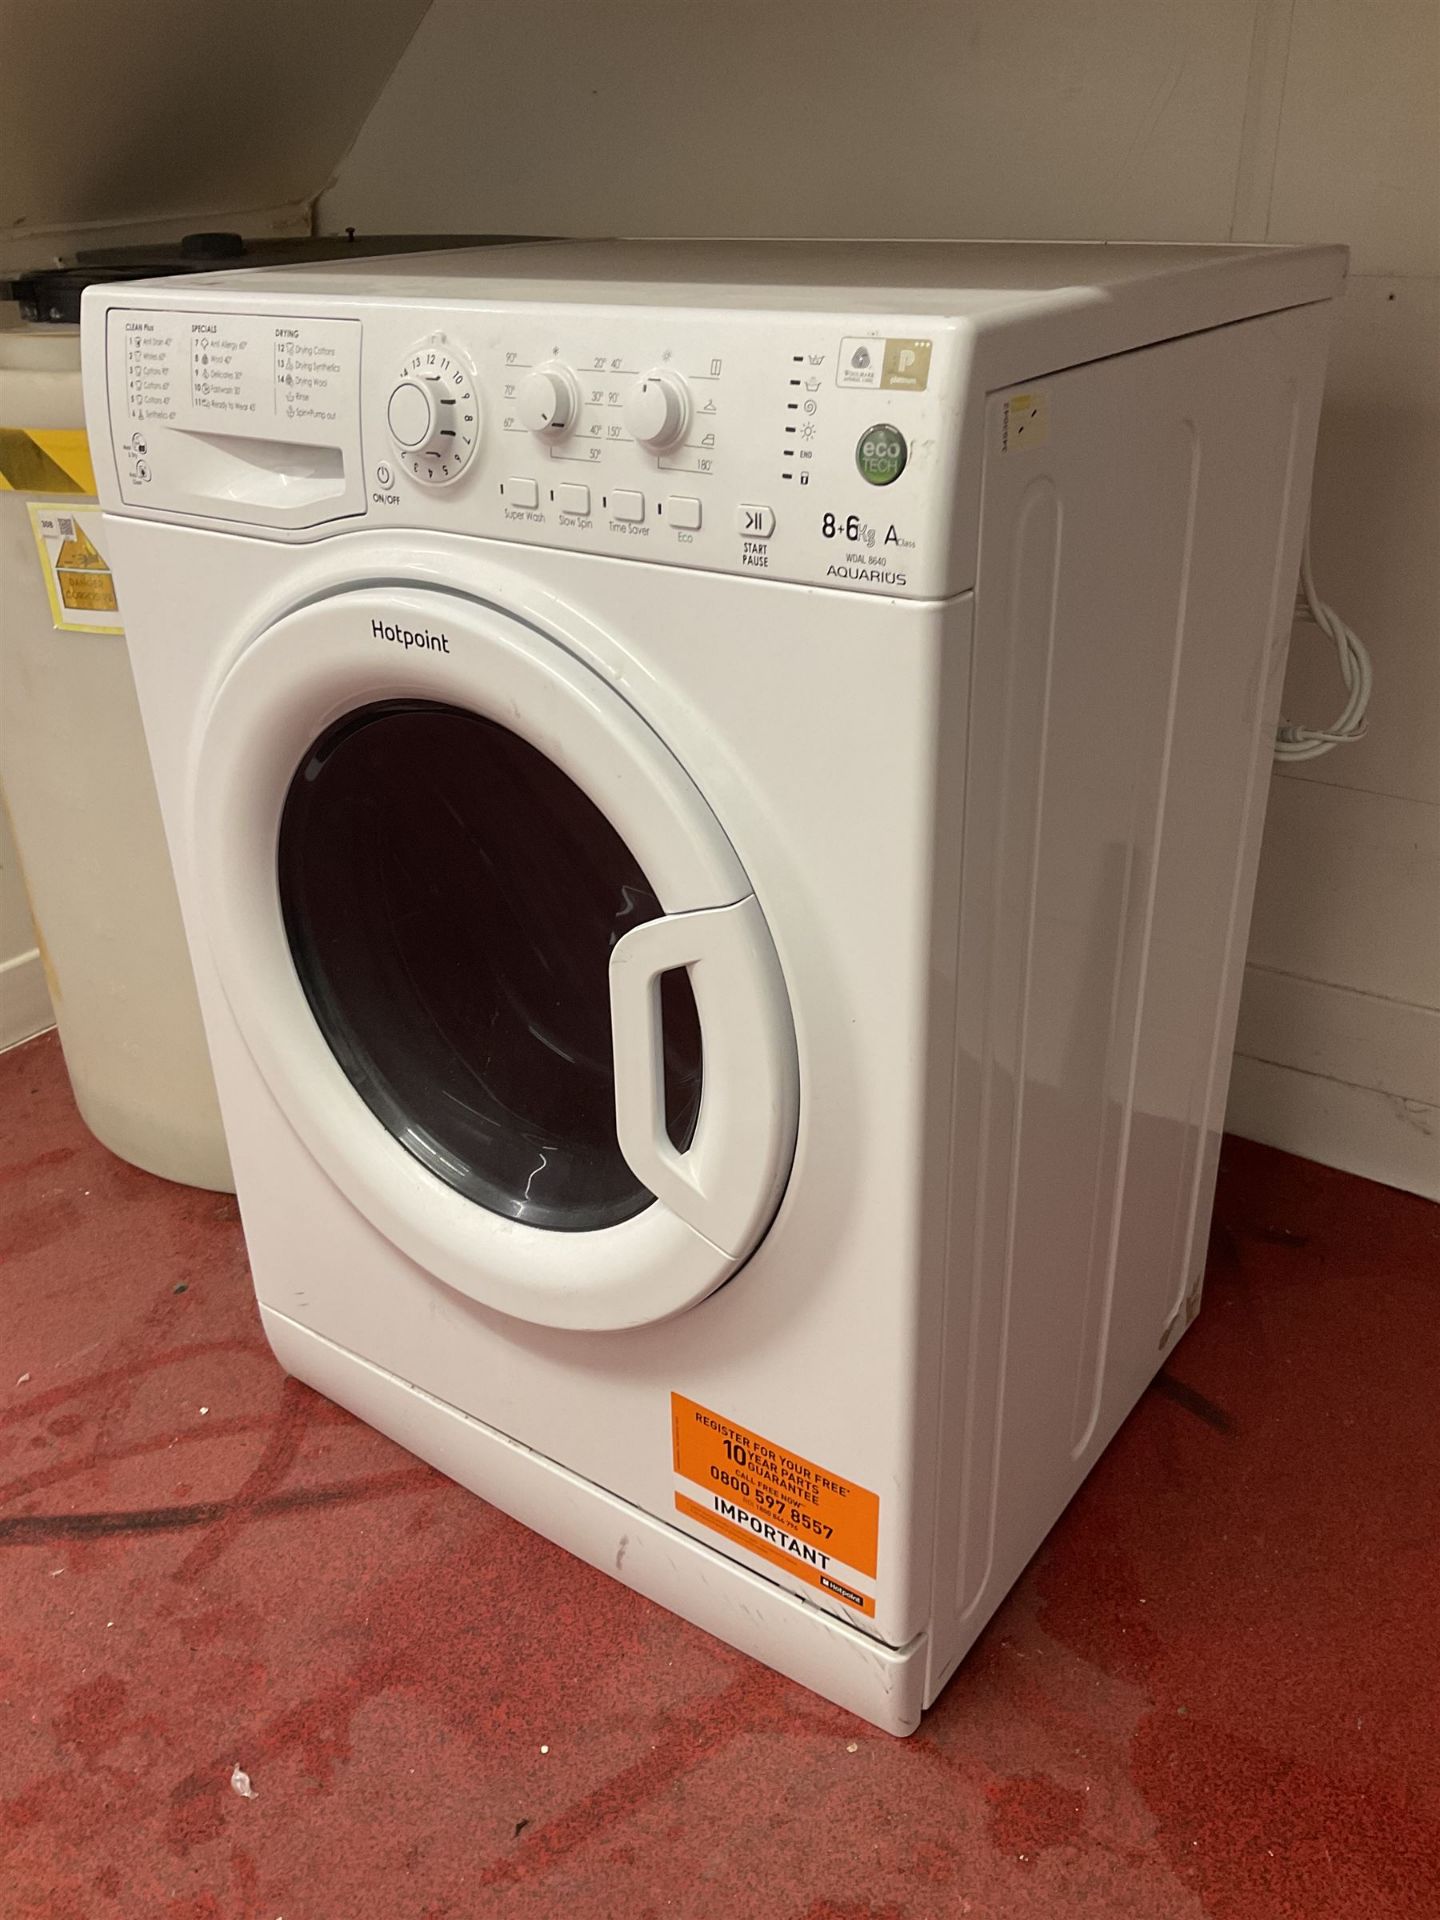 Hotpoint Aquarius 8kg washer dryer WDAL8640- LOT SUBJECT TO VAT ON THE HAMMER PRICE - To be - Image 4 of 5